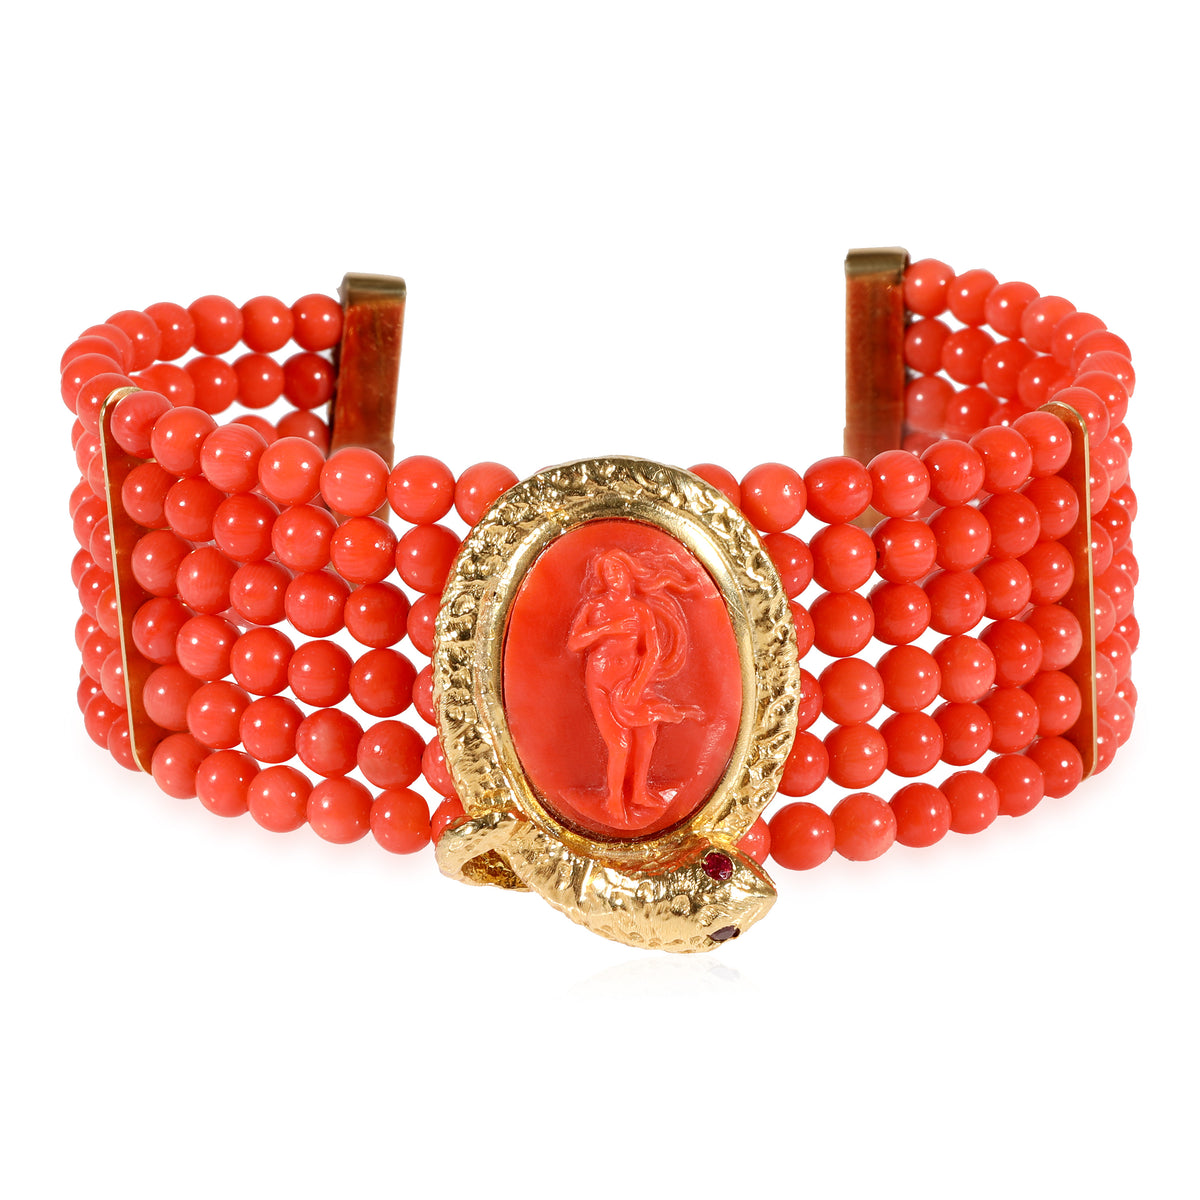 Italian Bracelet, Coral Beads & Cameo Center, 18k Yellow Gold with Snake Detail